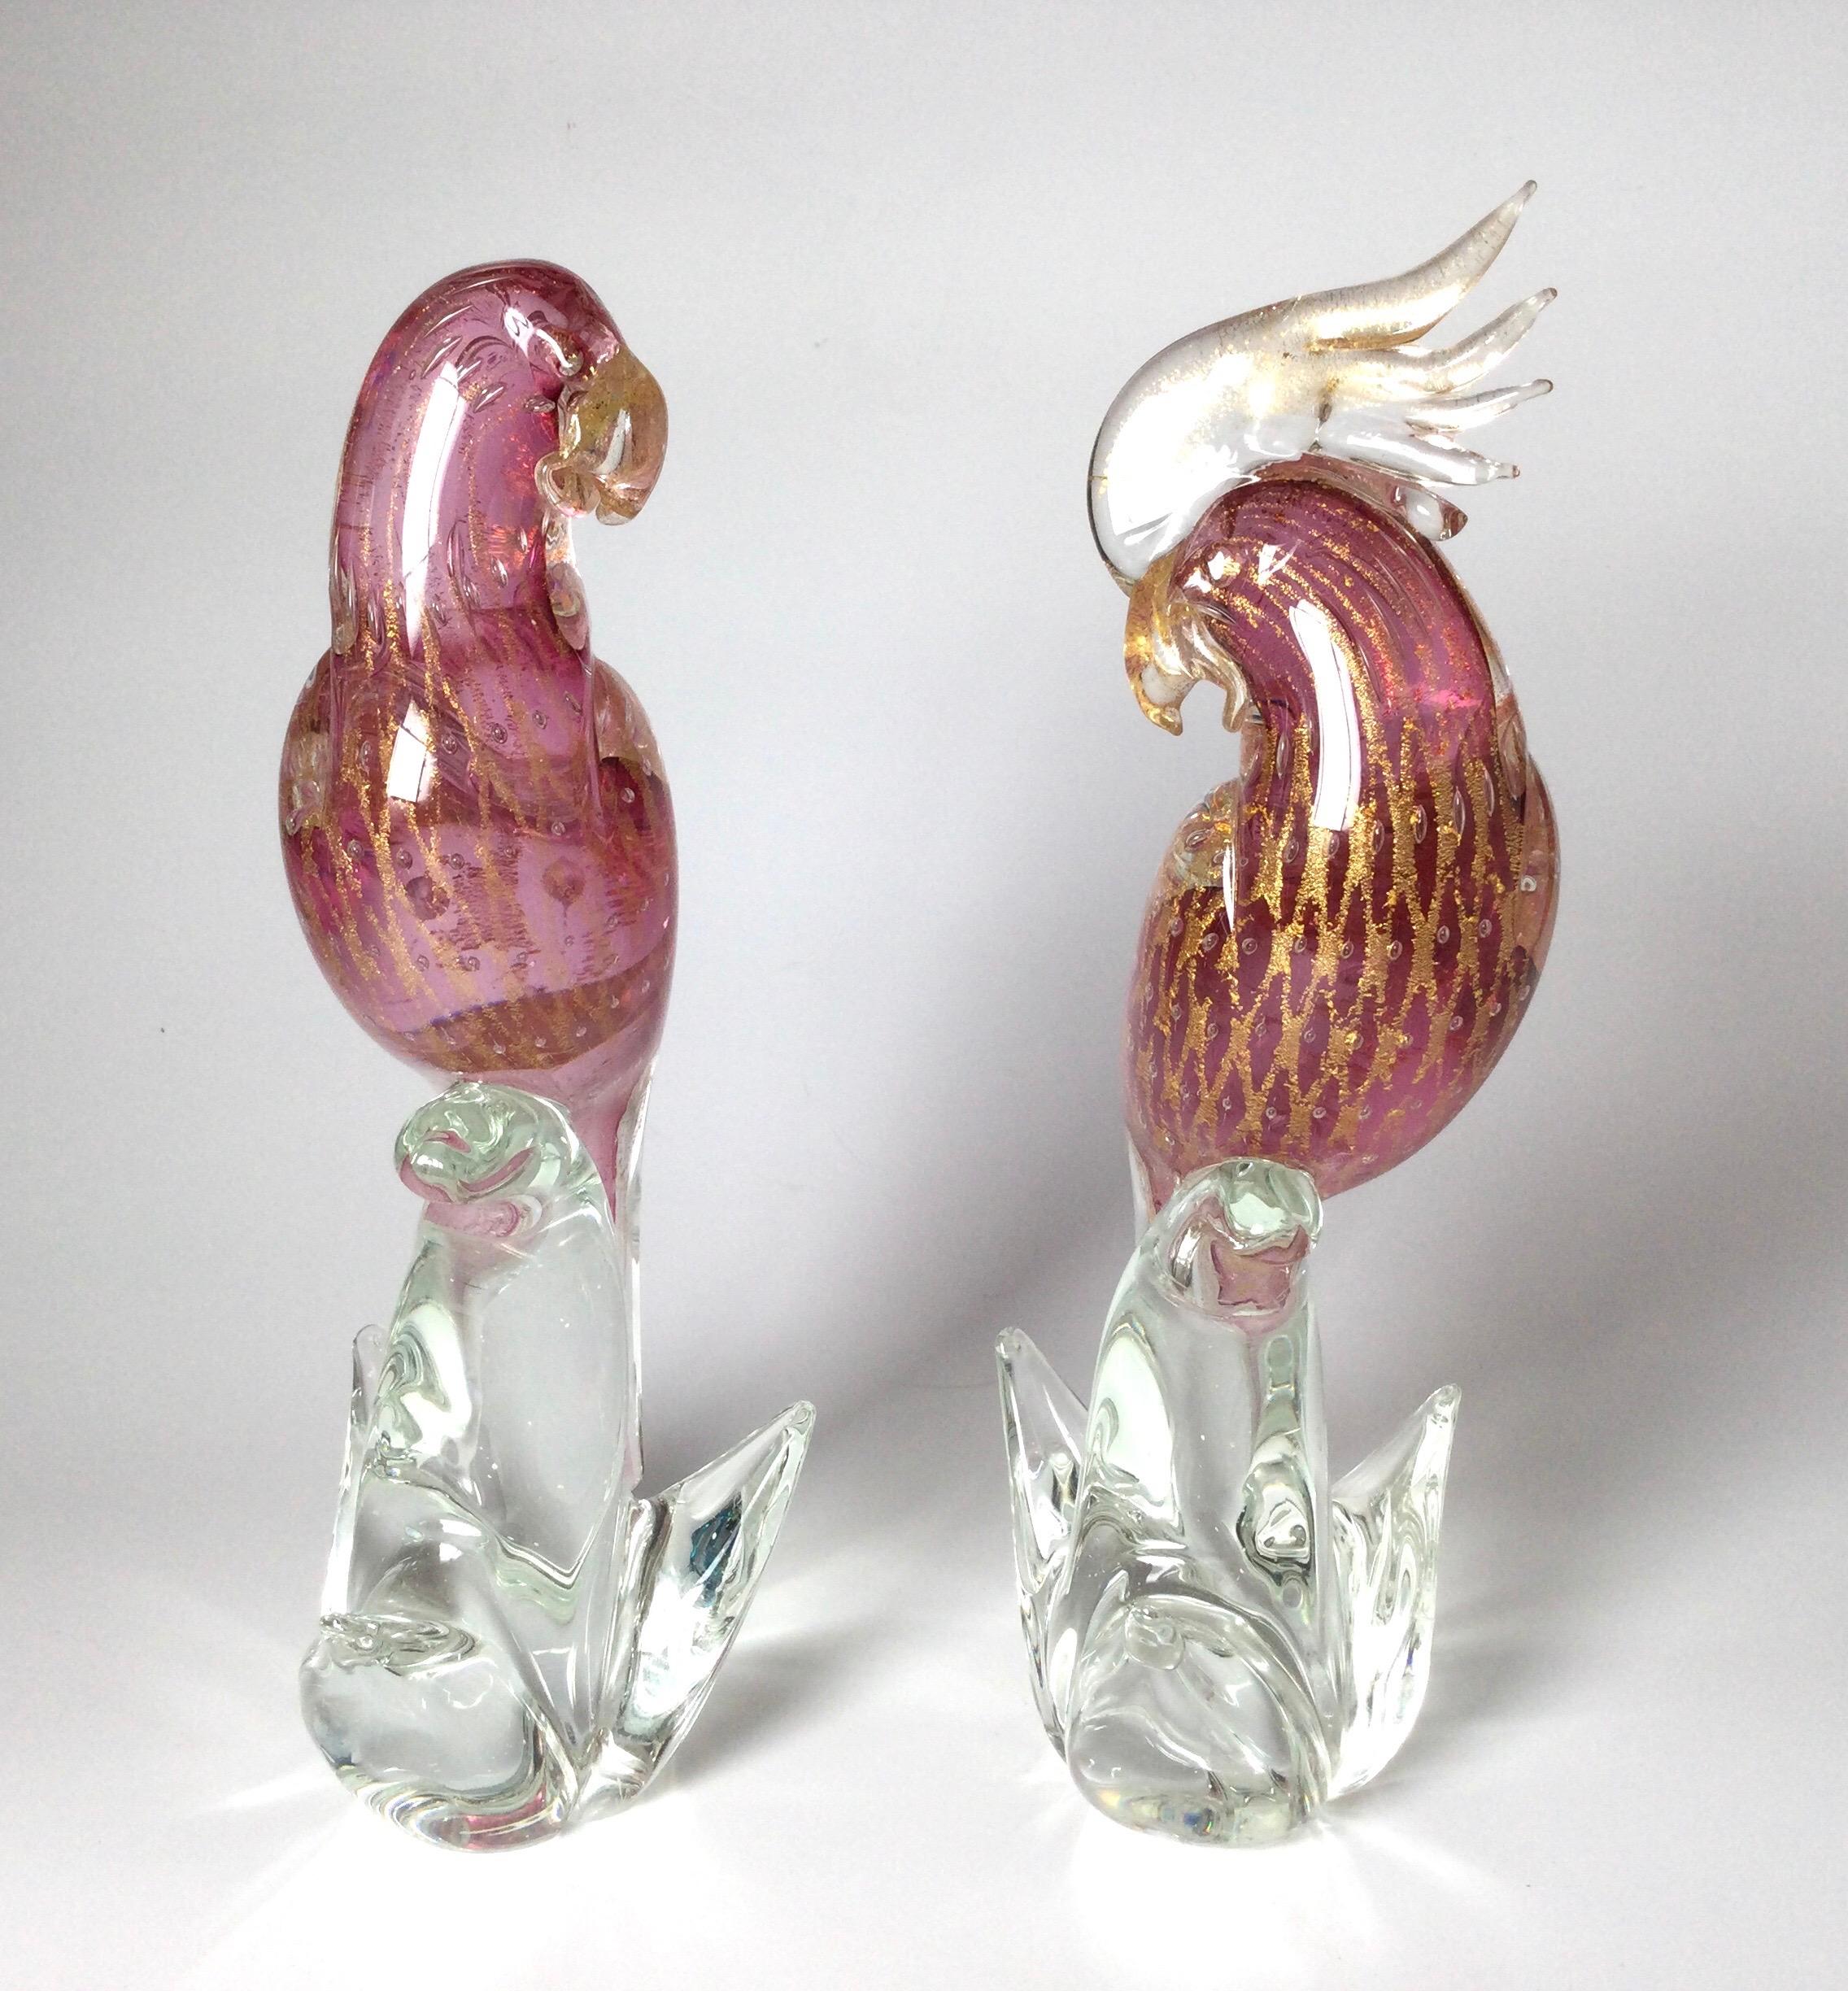 A pair of Murano Glass birds in pink and gold by artist S Sandro Frattin, circa 1970. 13.25 inches tall.